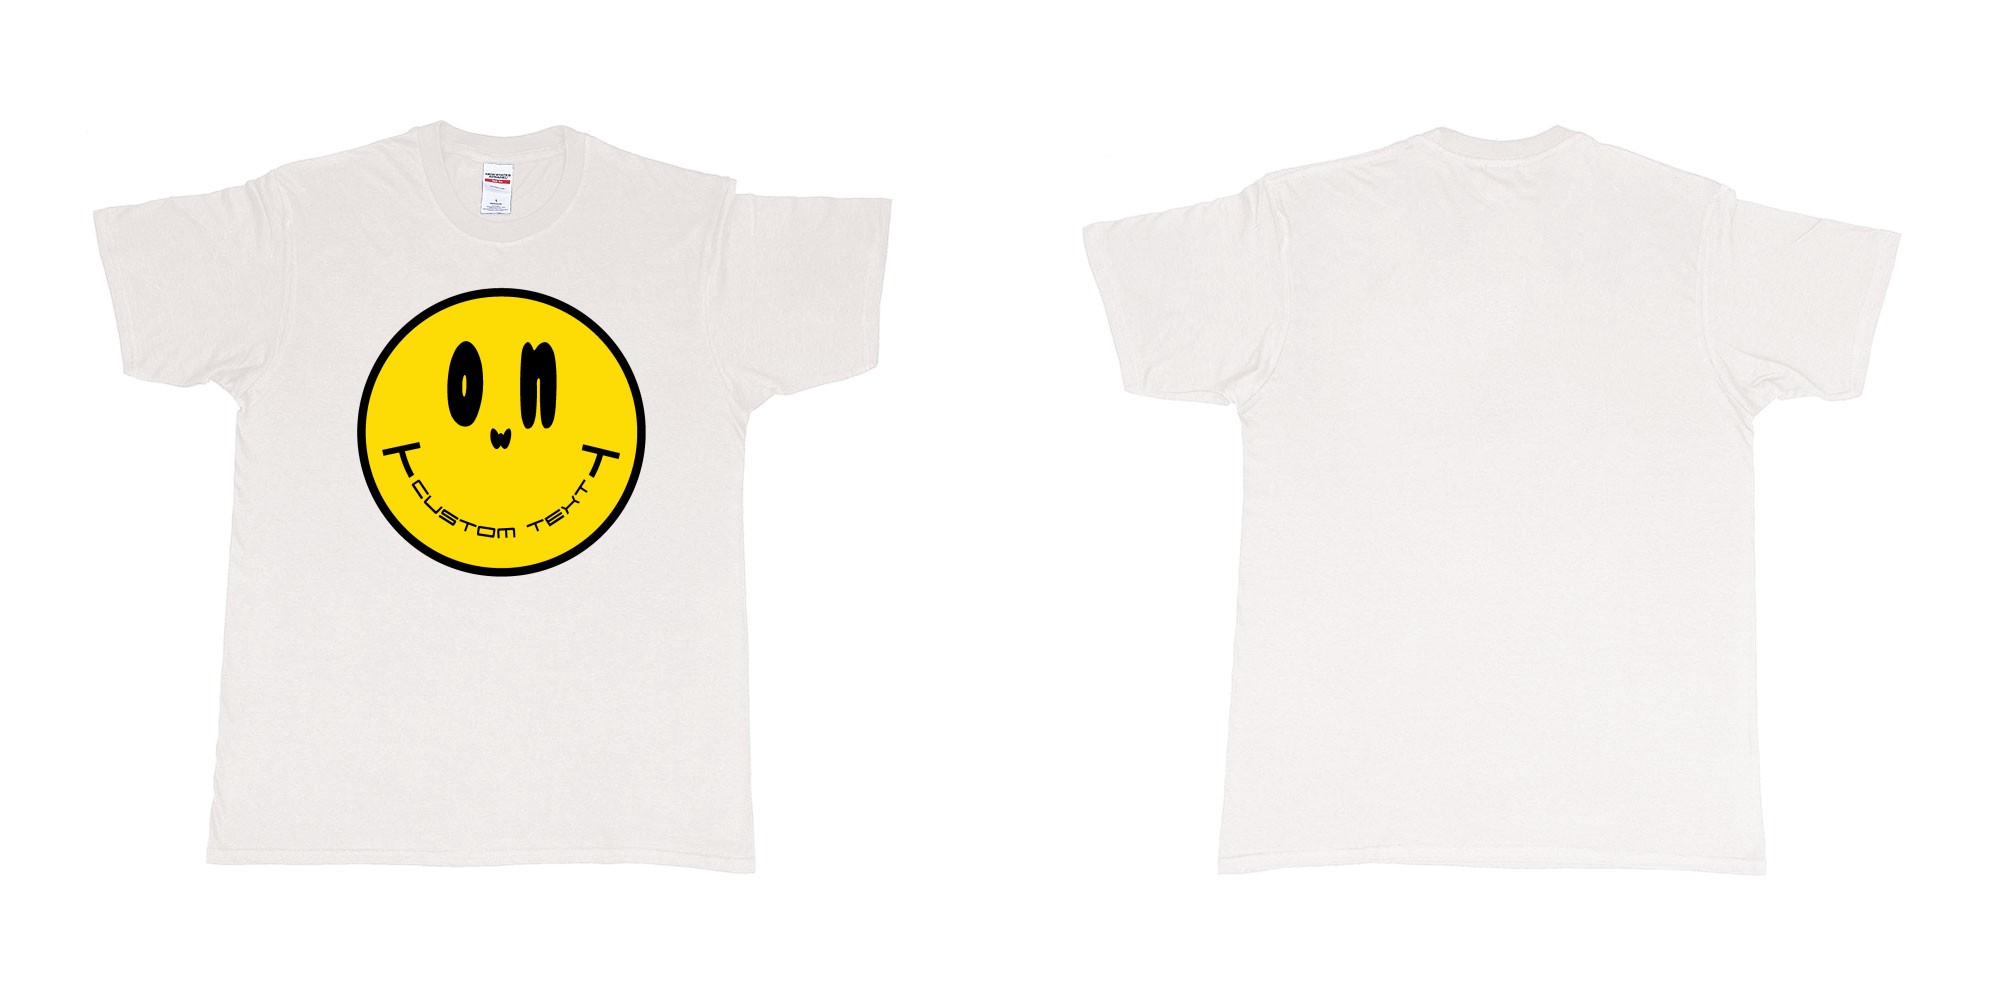 Custom tshirt design smiley face emoji custom text in fabric color white choice your own text made in Bali by The Pirate Way